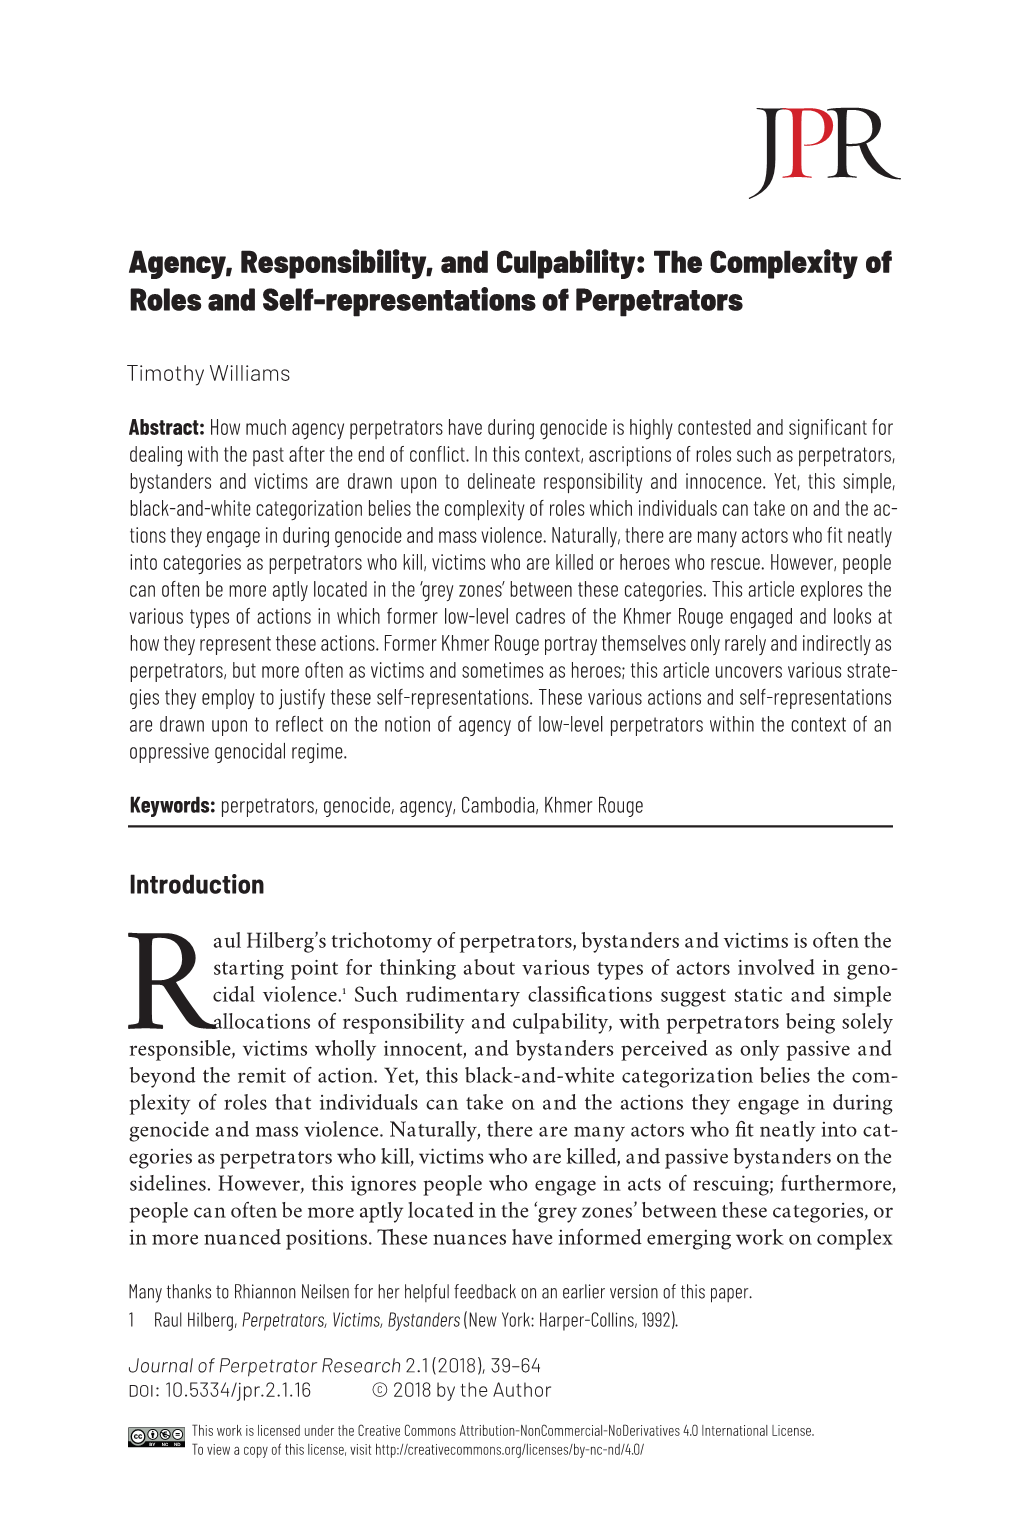 Agency, Responsibility, and Culpability: the Complexity of Roles and Self-Representations of Perpetrators